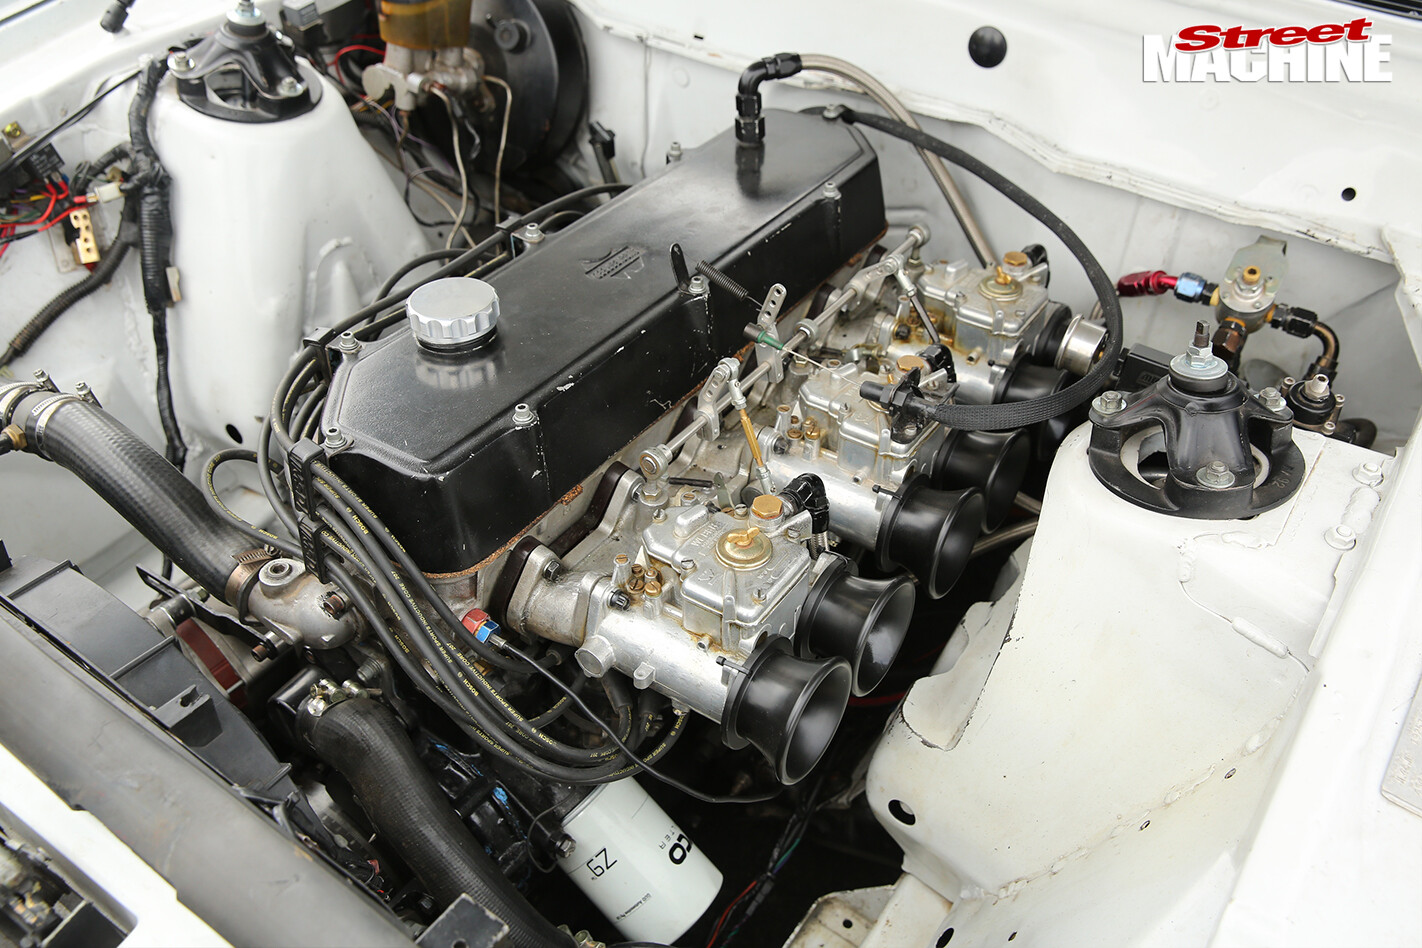 Ford -falcon -xf -ute -drag -challenge -engine -2